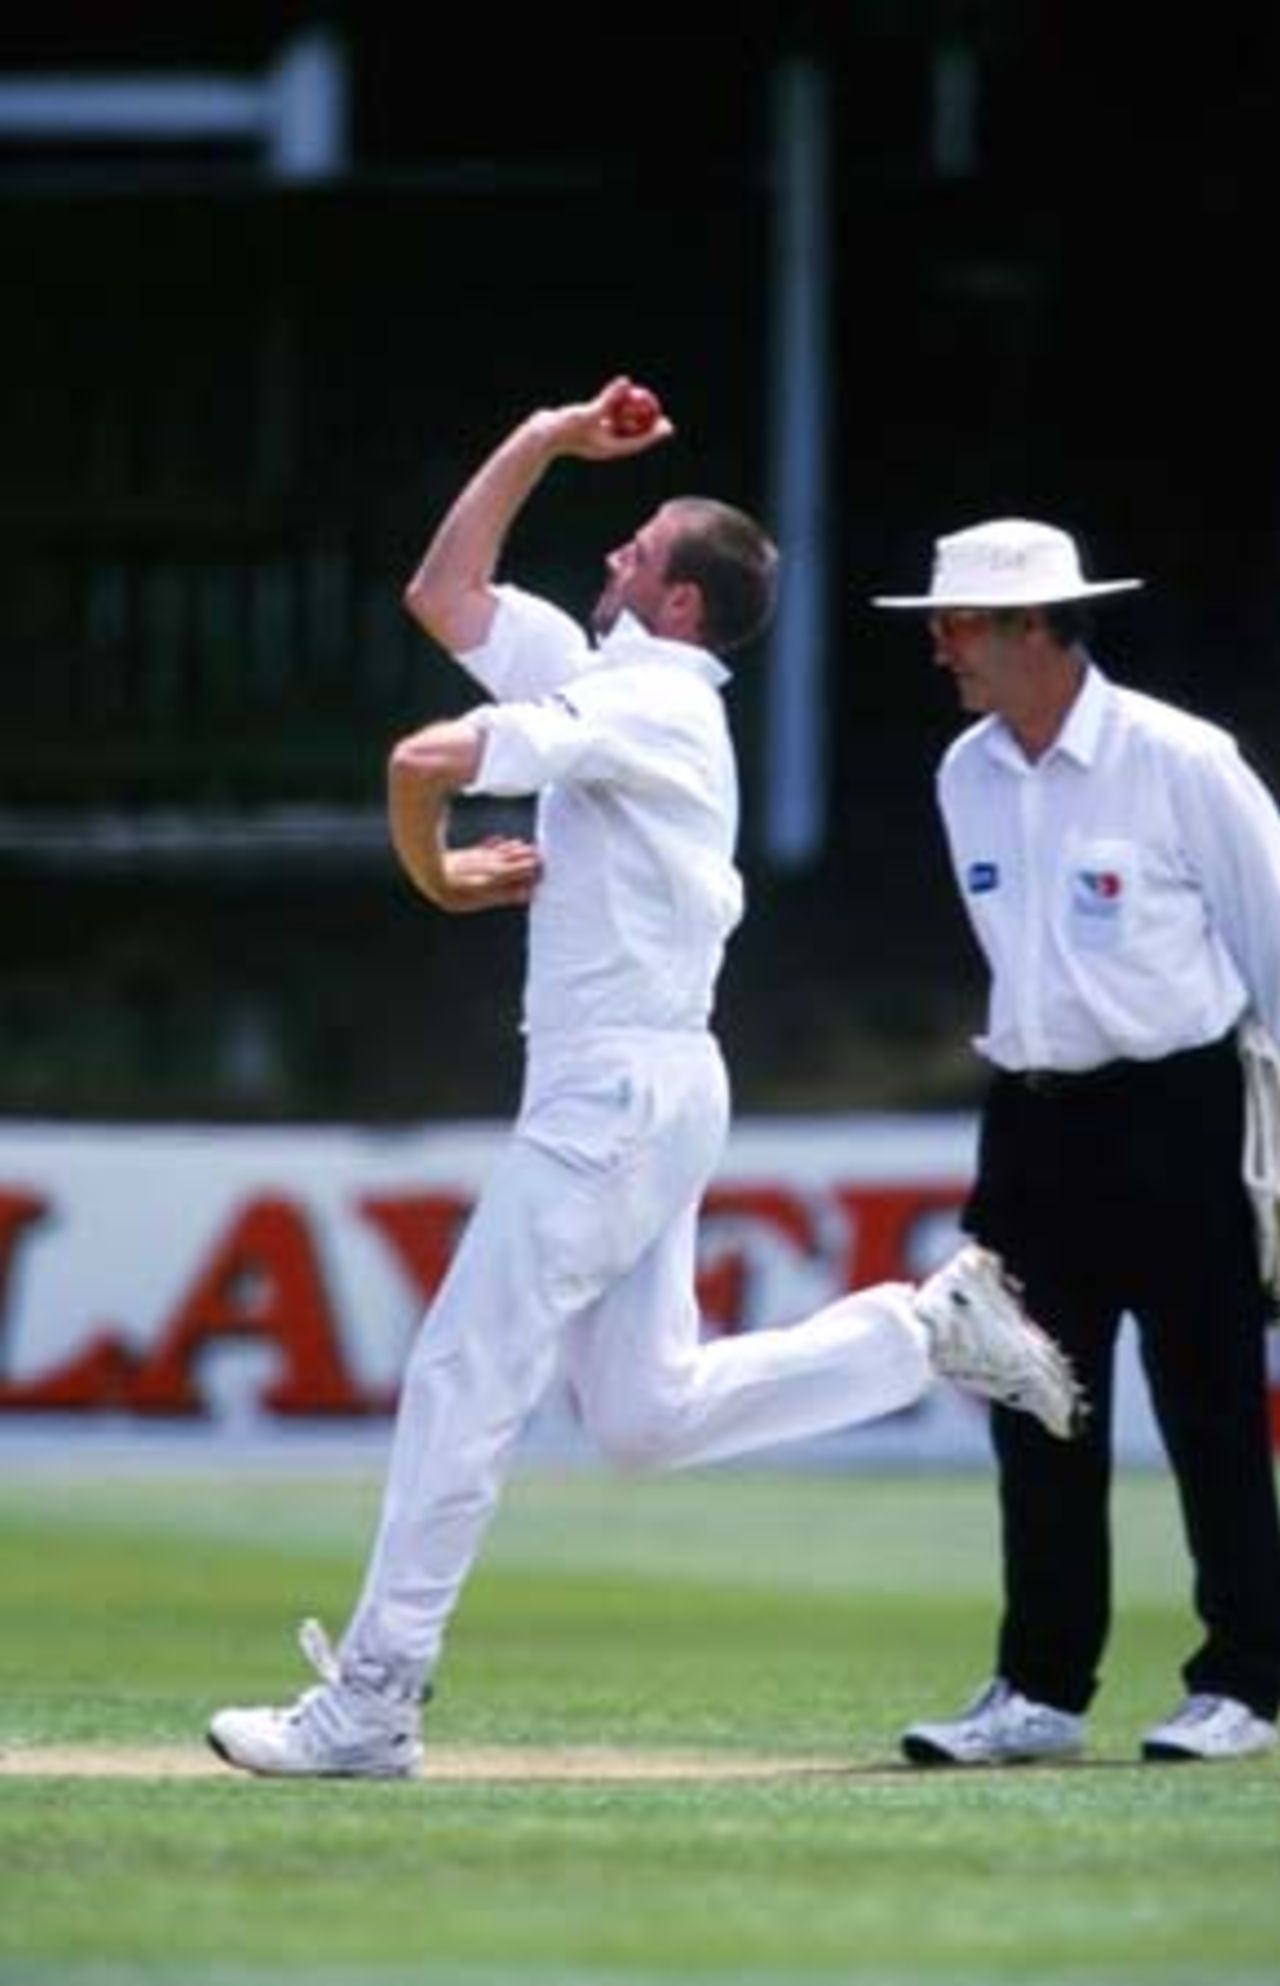 Auckland bowler Chris Drum delivers a ball during his second innings spell of 6-34 from 21.3 overs. Umpire Tony Hill looks on. Tour match: Auckland v Bangladeshis at Eden Park Outer Oval, Auckland, 12-15 Dec 2001 (14 December 2001).